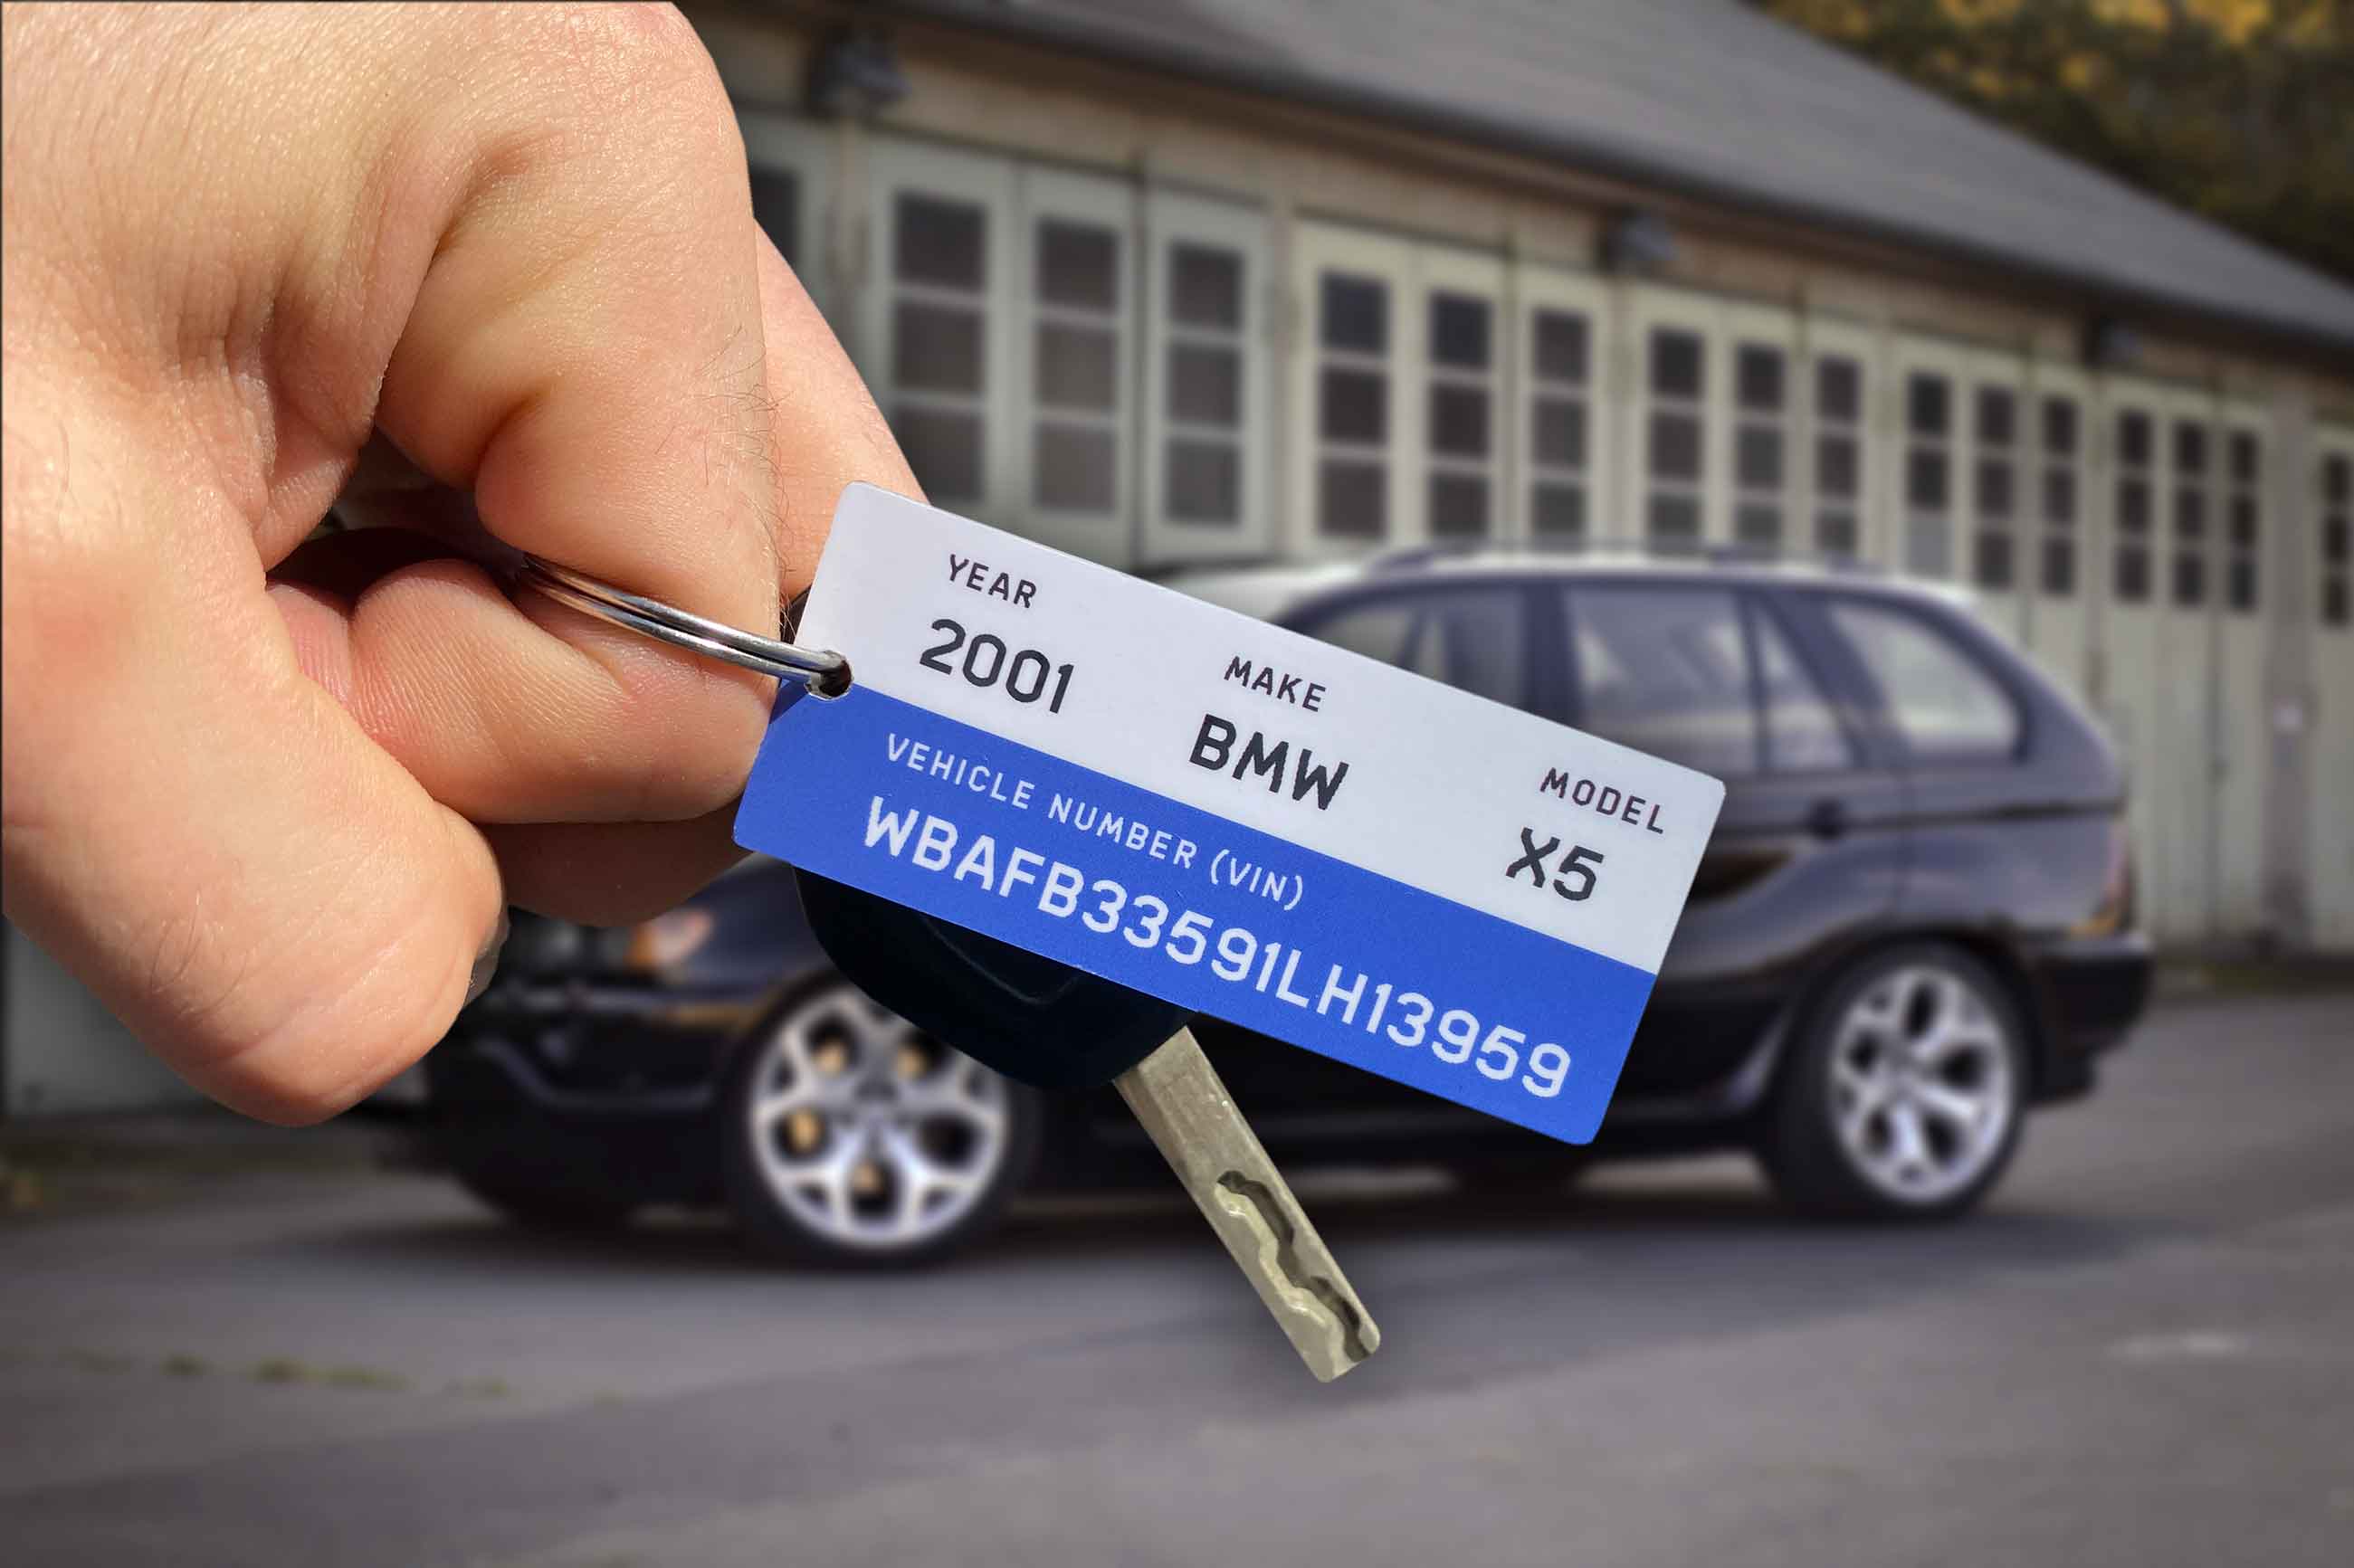 Custom keychain with your car vin number